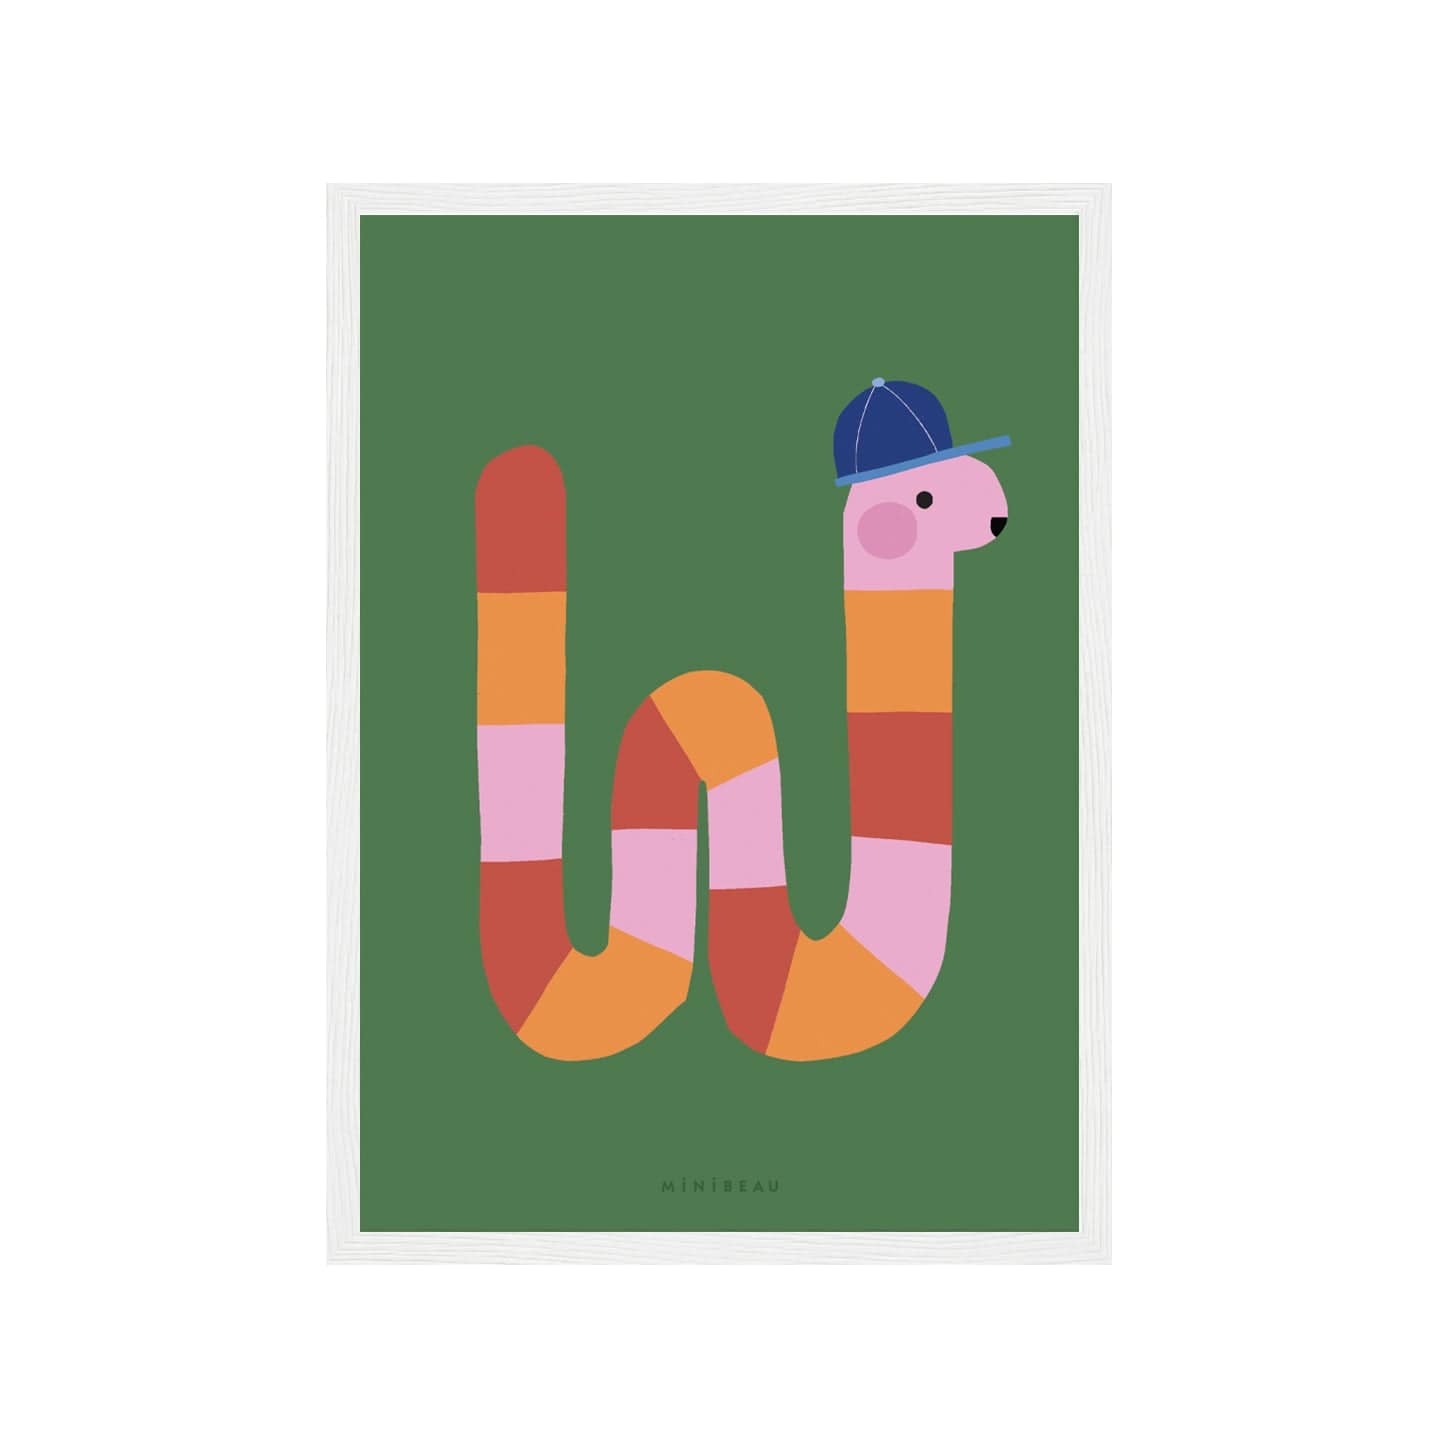 Art print in a white frame. Our Happy Alphabet 'W' Art Print shows a pink, red and orange wriggly worm in the shape of a W. The worm is wearing a blue baseball cap and is on a green background.